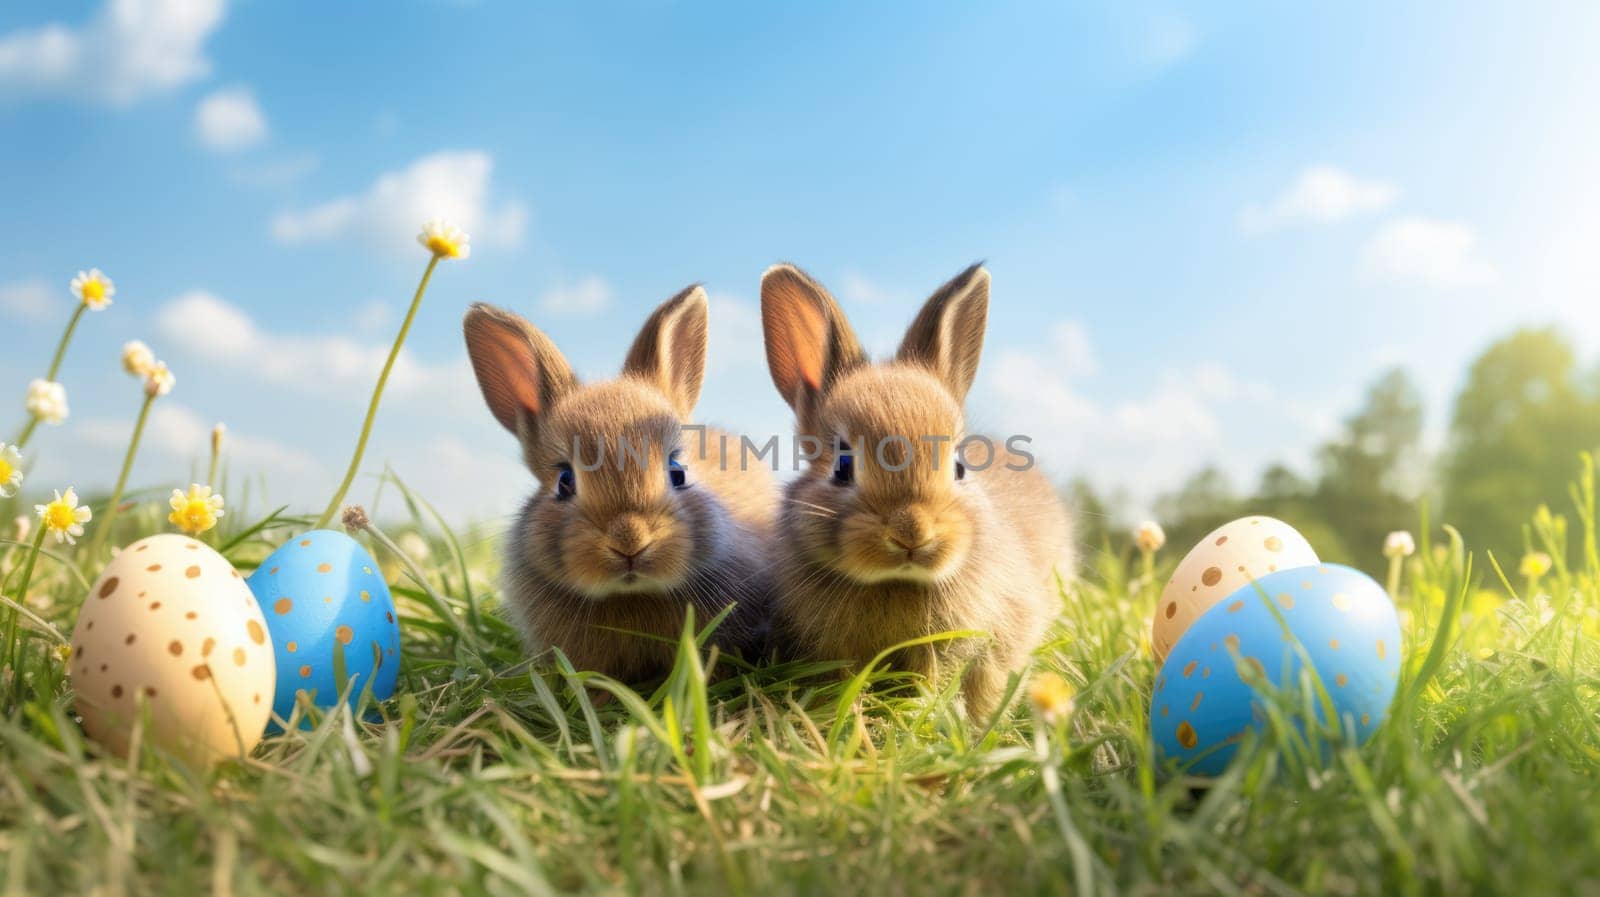 Cute bunnies sitting on the green grass with colorful Easter eggs under clear blue sky on sunny spring day. Easter egg hunt by JuliaDorian